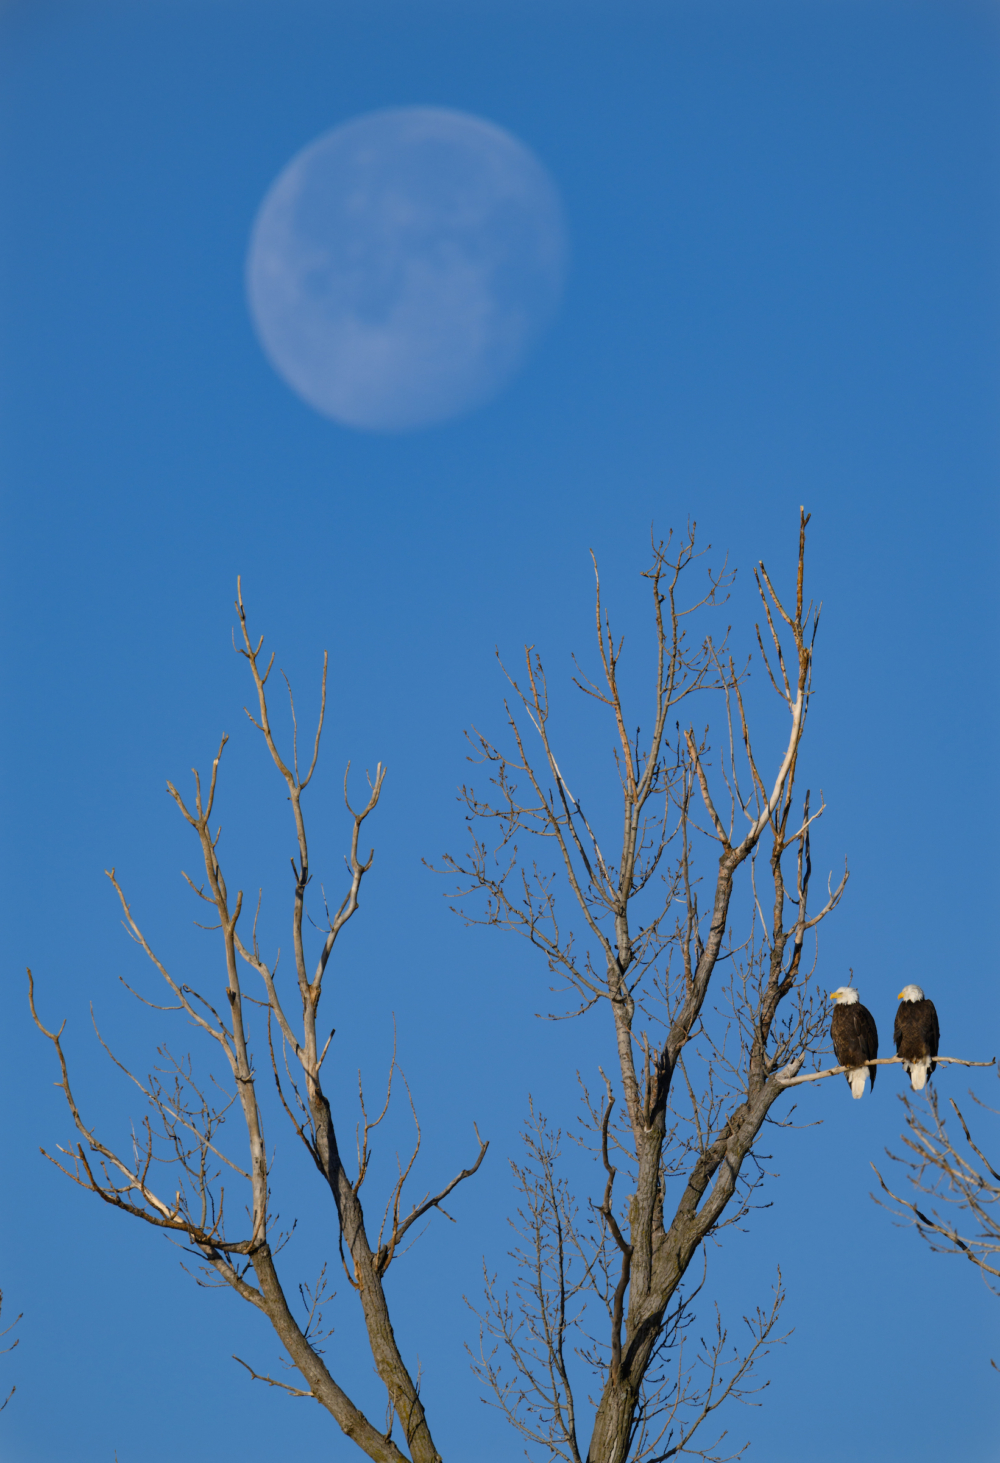 A pair of bald eagles perched in a tree overlooking the Cattail Pool at Loess Bluffs NWR (formerly known as Squaw Creek). Loess Bluffs is a wildlife refuge managed by the U.S. Fish and Wildlife Service. The 700-acre refuge, located in northwest Missouri is known for the migrating waterfowl, particularly Snow Geese. Fall and Spring migration can bring millions of Snow Geese to the refuge. Also, bald eagles and an occasional golden eagle pass through the area during the fall and winter months. The 10-mile auto tour around the waterways and marshes of the refuge is an excellent way to spot birds of prey, waterfowl, beavers, otters, and muskrats.